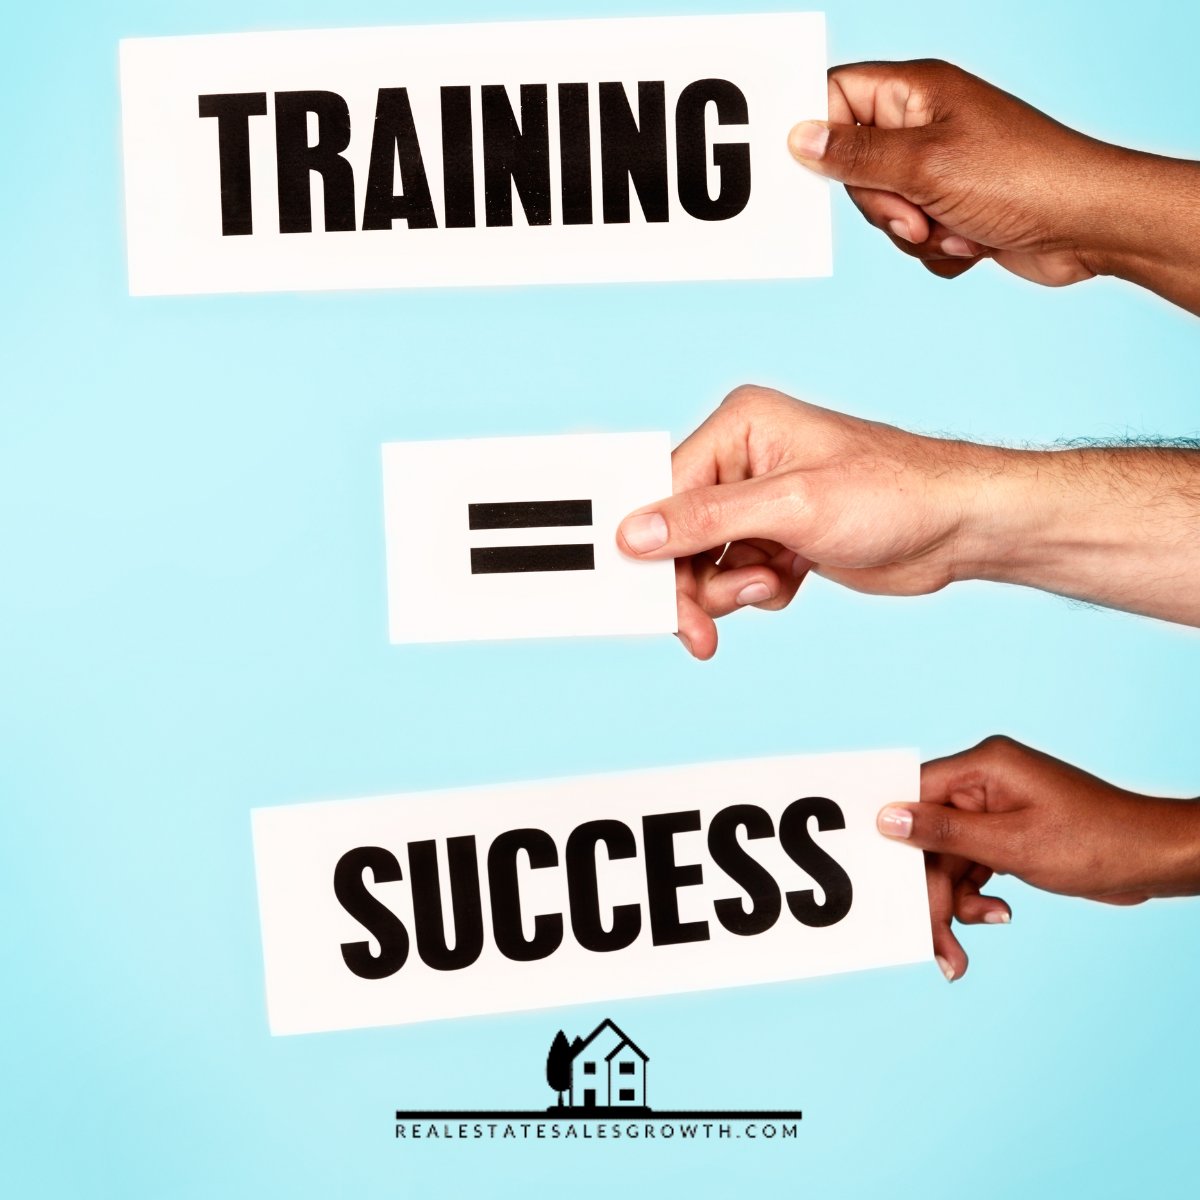 You don't rise to the level of your expectations & goals; you fall to the level of your training.

That's why your training should never stop. 

#RealtorGoals #realestatebusiness #RealEstateSuccess #realestatetrainer #realestatesalesgrowth #realestatetraining #realestatecoach